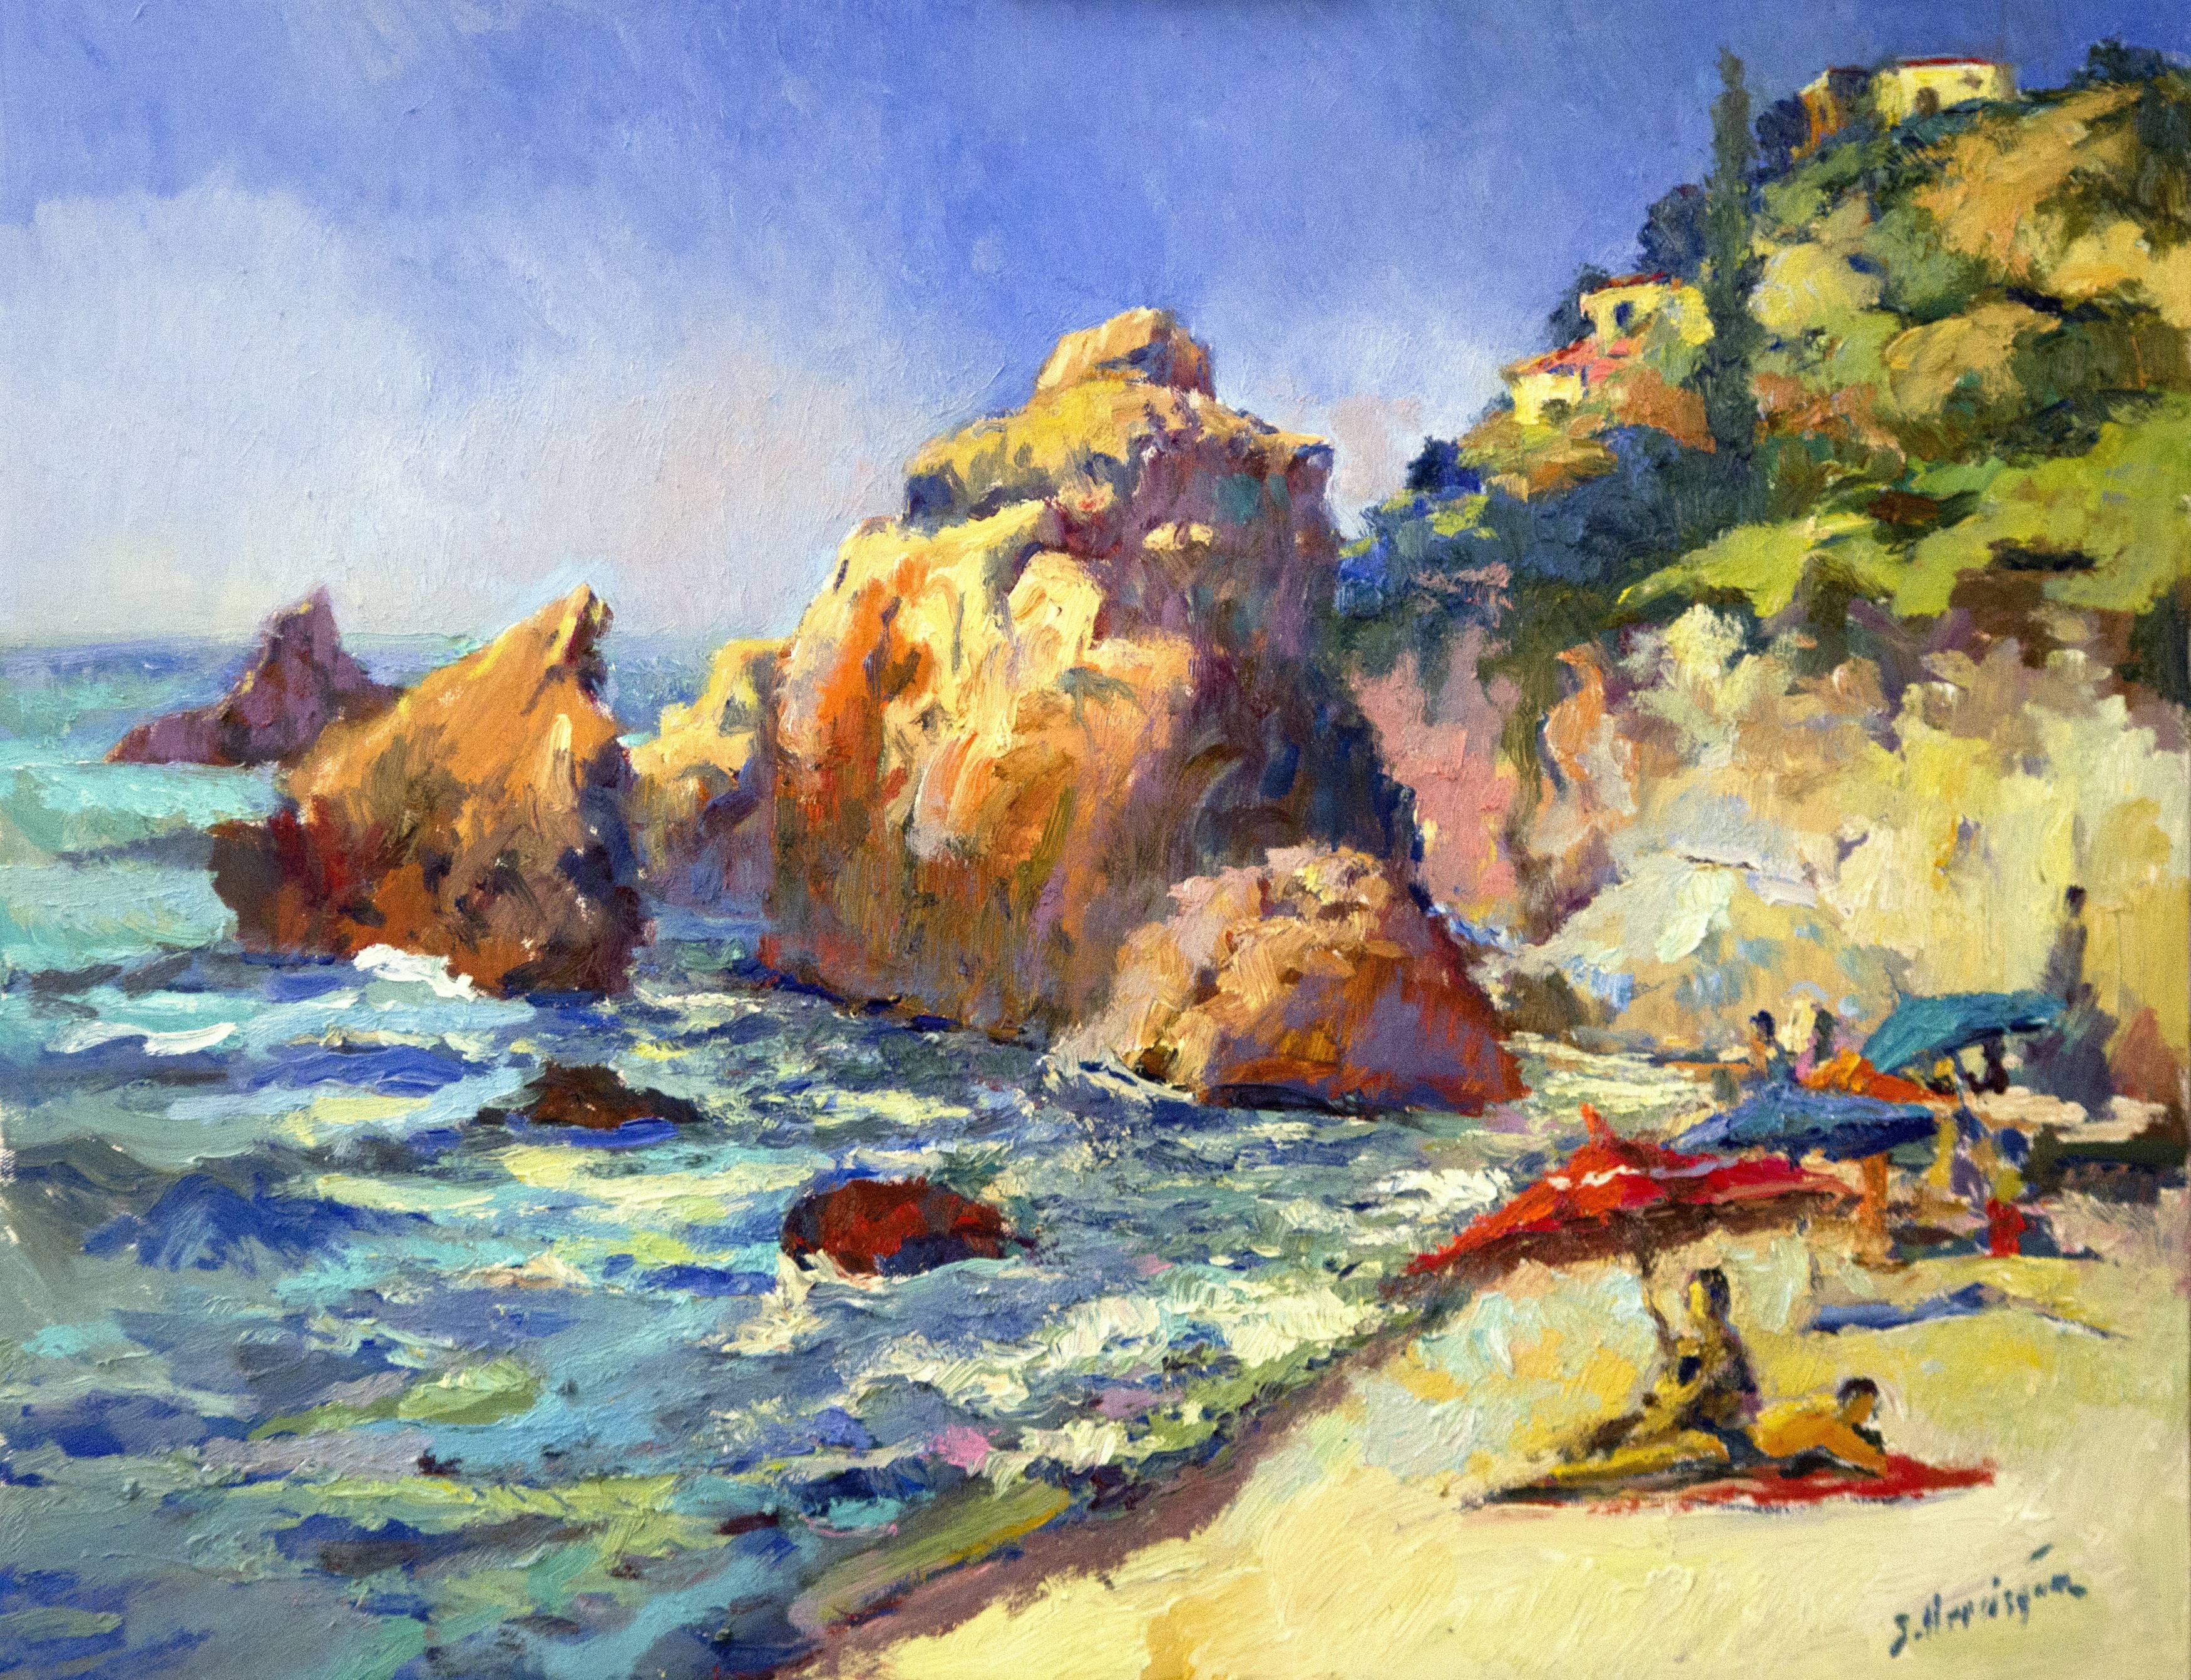 Suren Nersisyan Landscape Painting - Sunny Day on The Beach, Pacific Ocean, Oil Painting